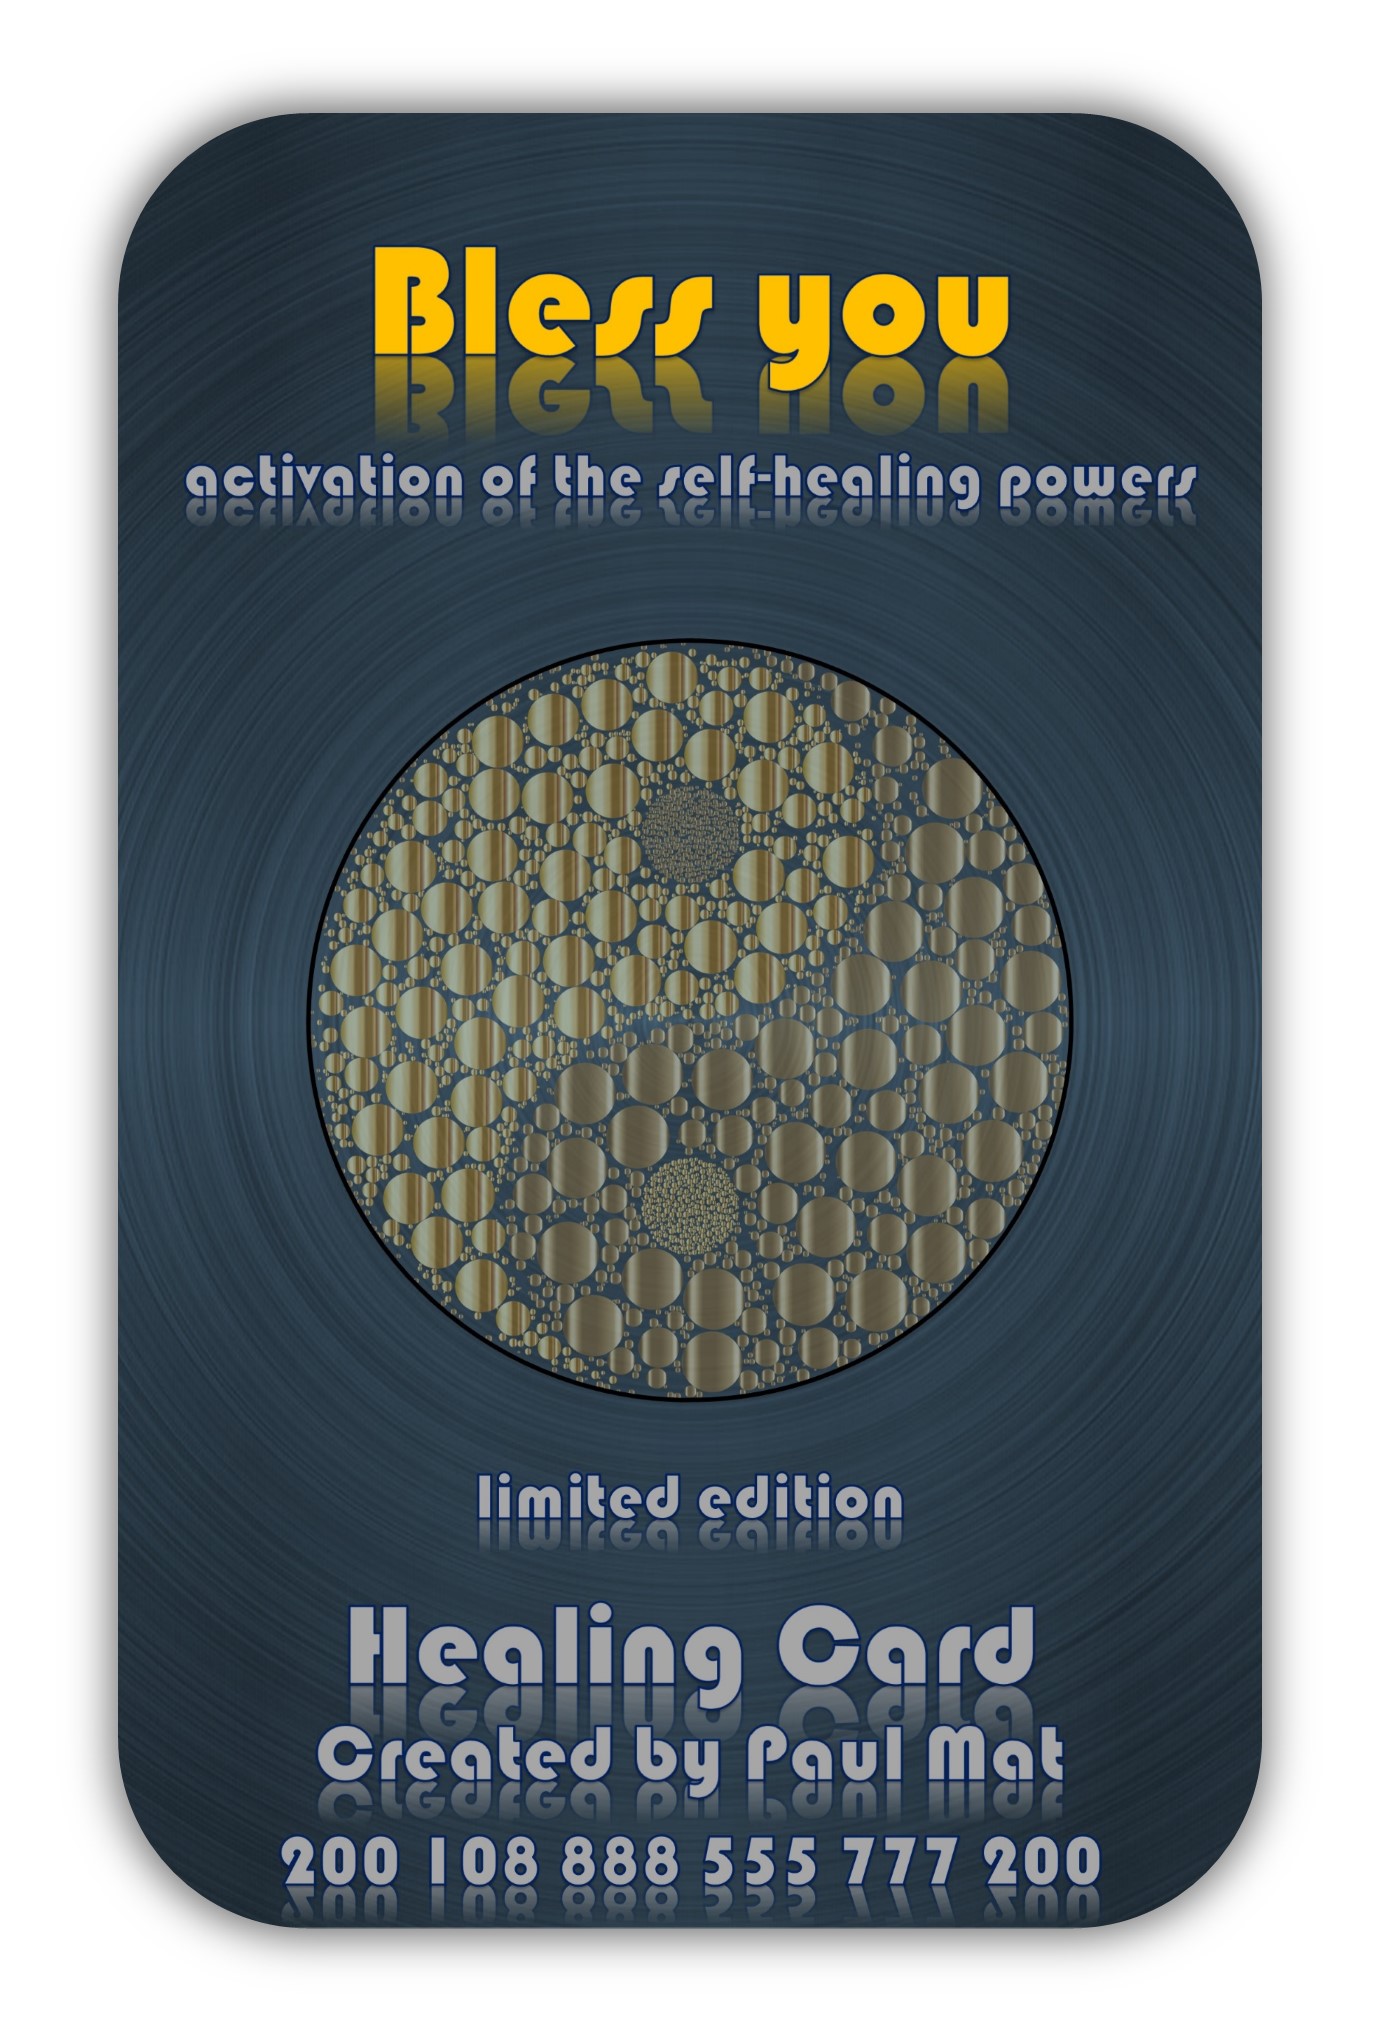 Healing Number Card with radionics barcode #200